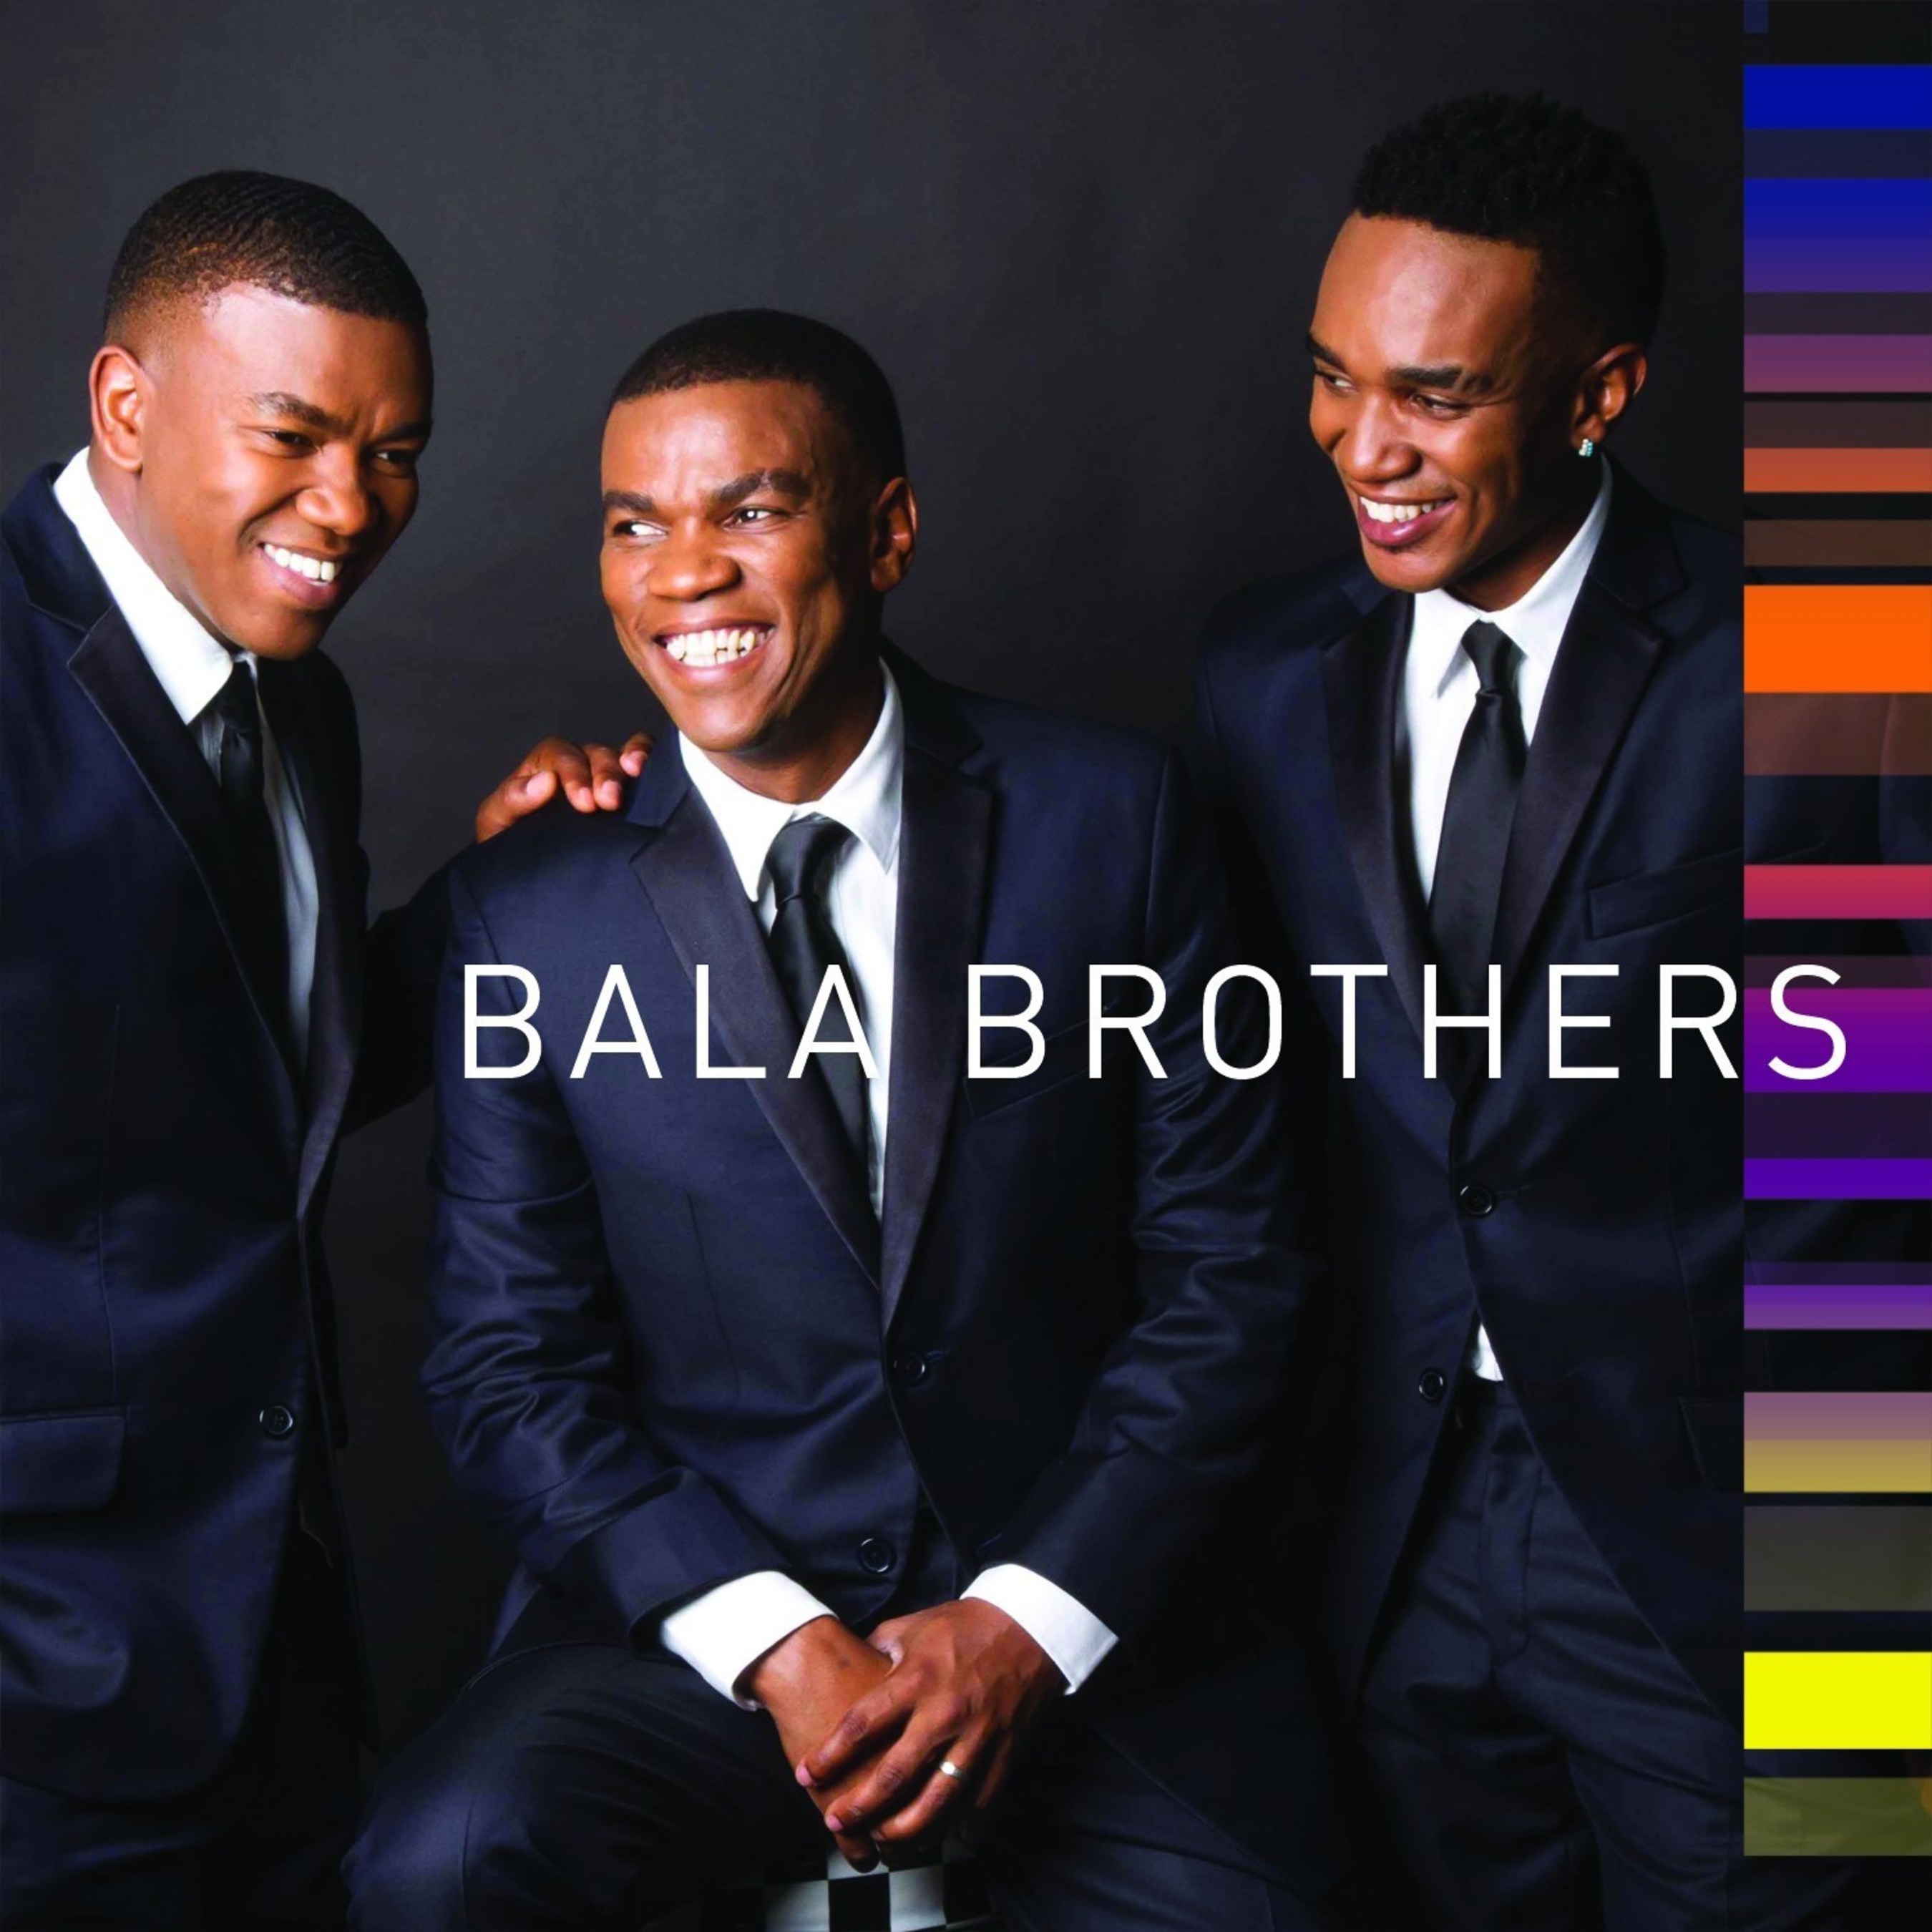 The Bala Brothers - Loyiso, Zwai and Phelo - are a household name in South Africa. Overcoming apartheid, the trio rose out of poverty on the strength of their musical talent and broke the color barrier of the famous Drakensberg Boys' Choir, becoming its first black members. For their self-titled debut album on Warner Classics, the Brothers perform an inspiring live program of music ranging from The Lion King to Paul Simon, in their hometown Johannesburg.